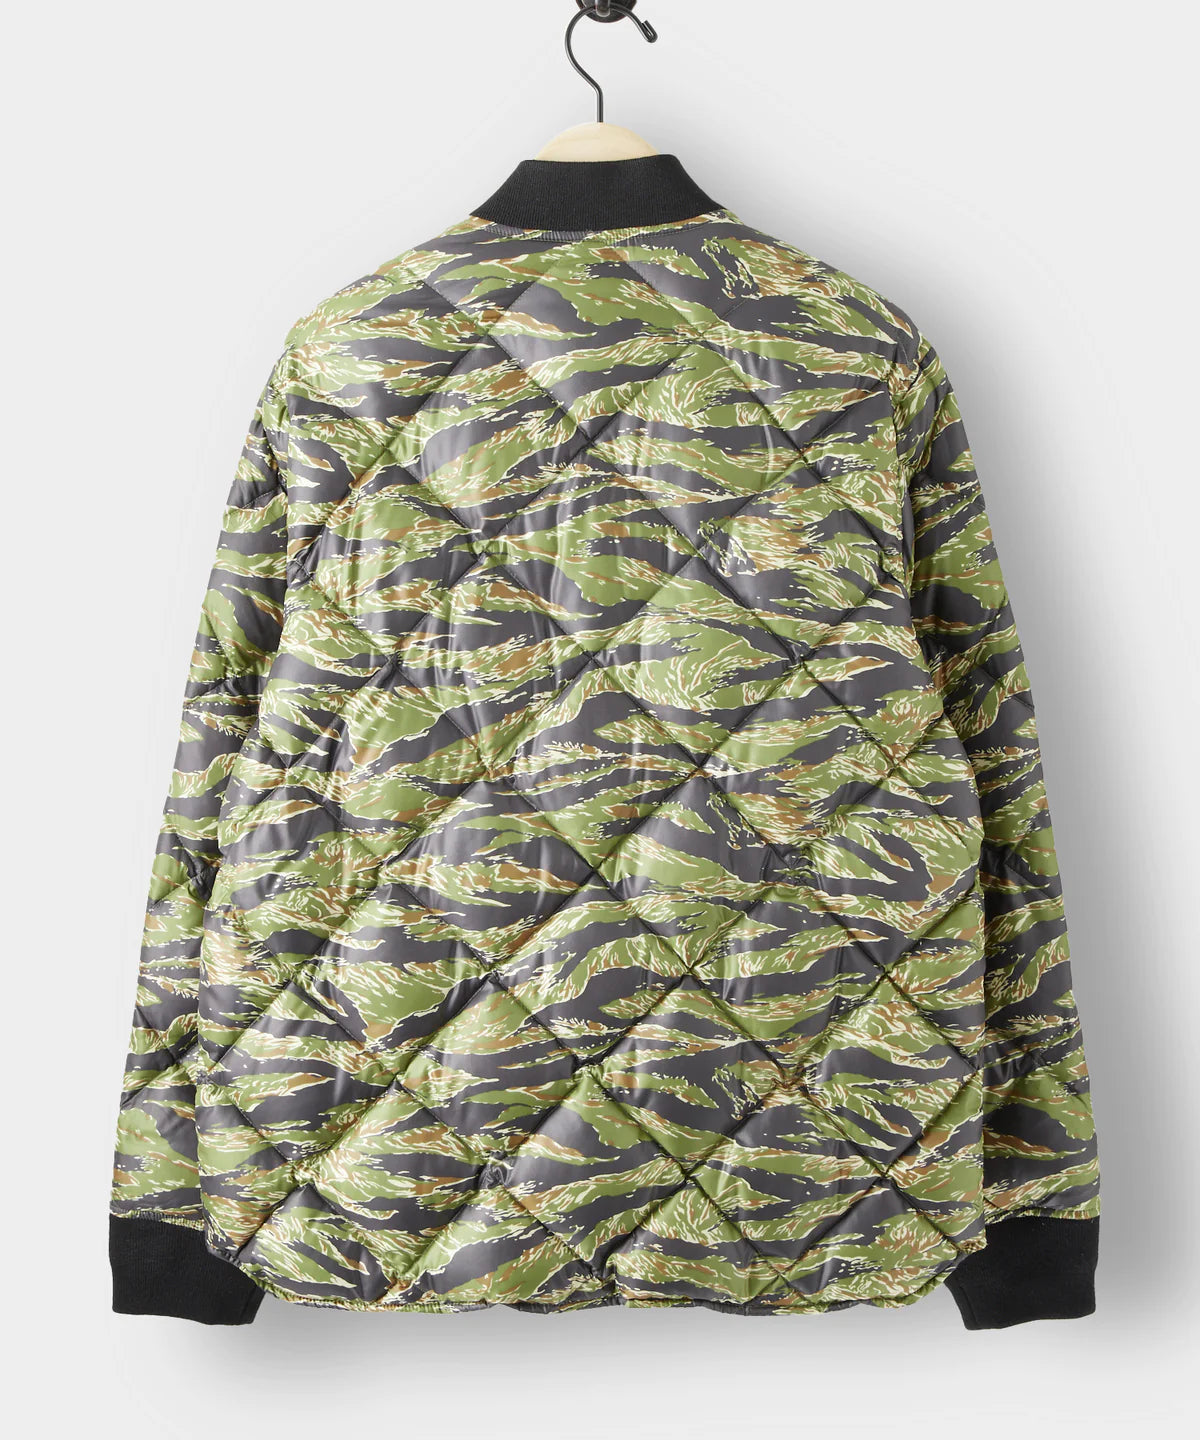 TODD SNYDER JAPANESE QUILTED DOWN SNAP BOMBER JACKET IN TIGER CAMO